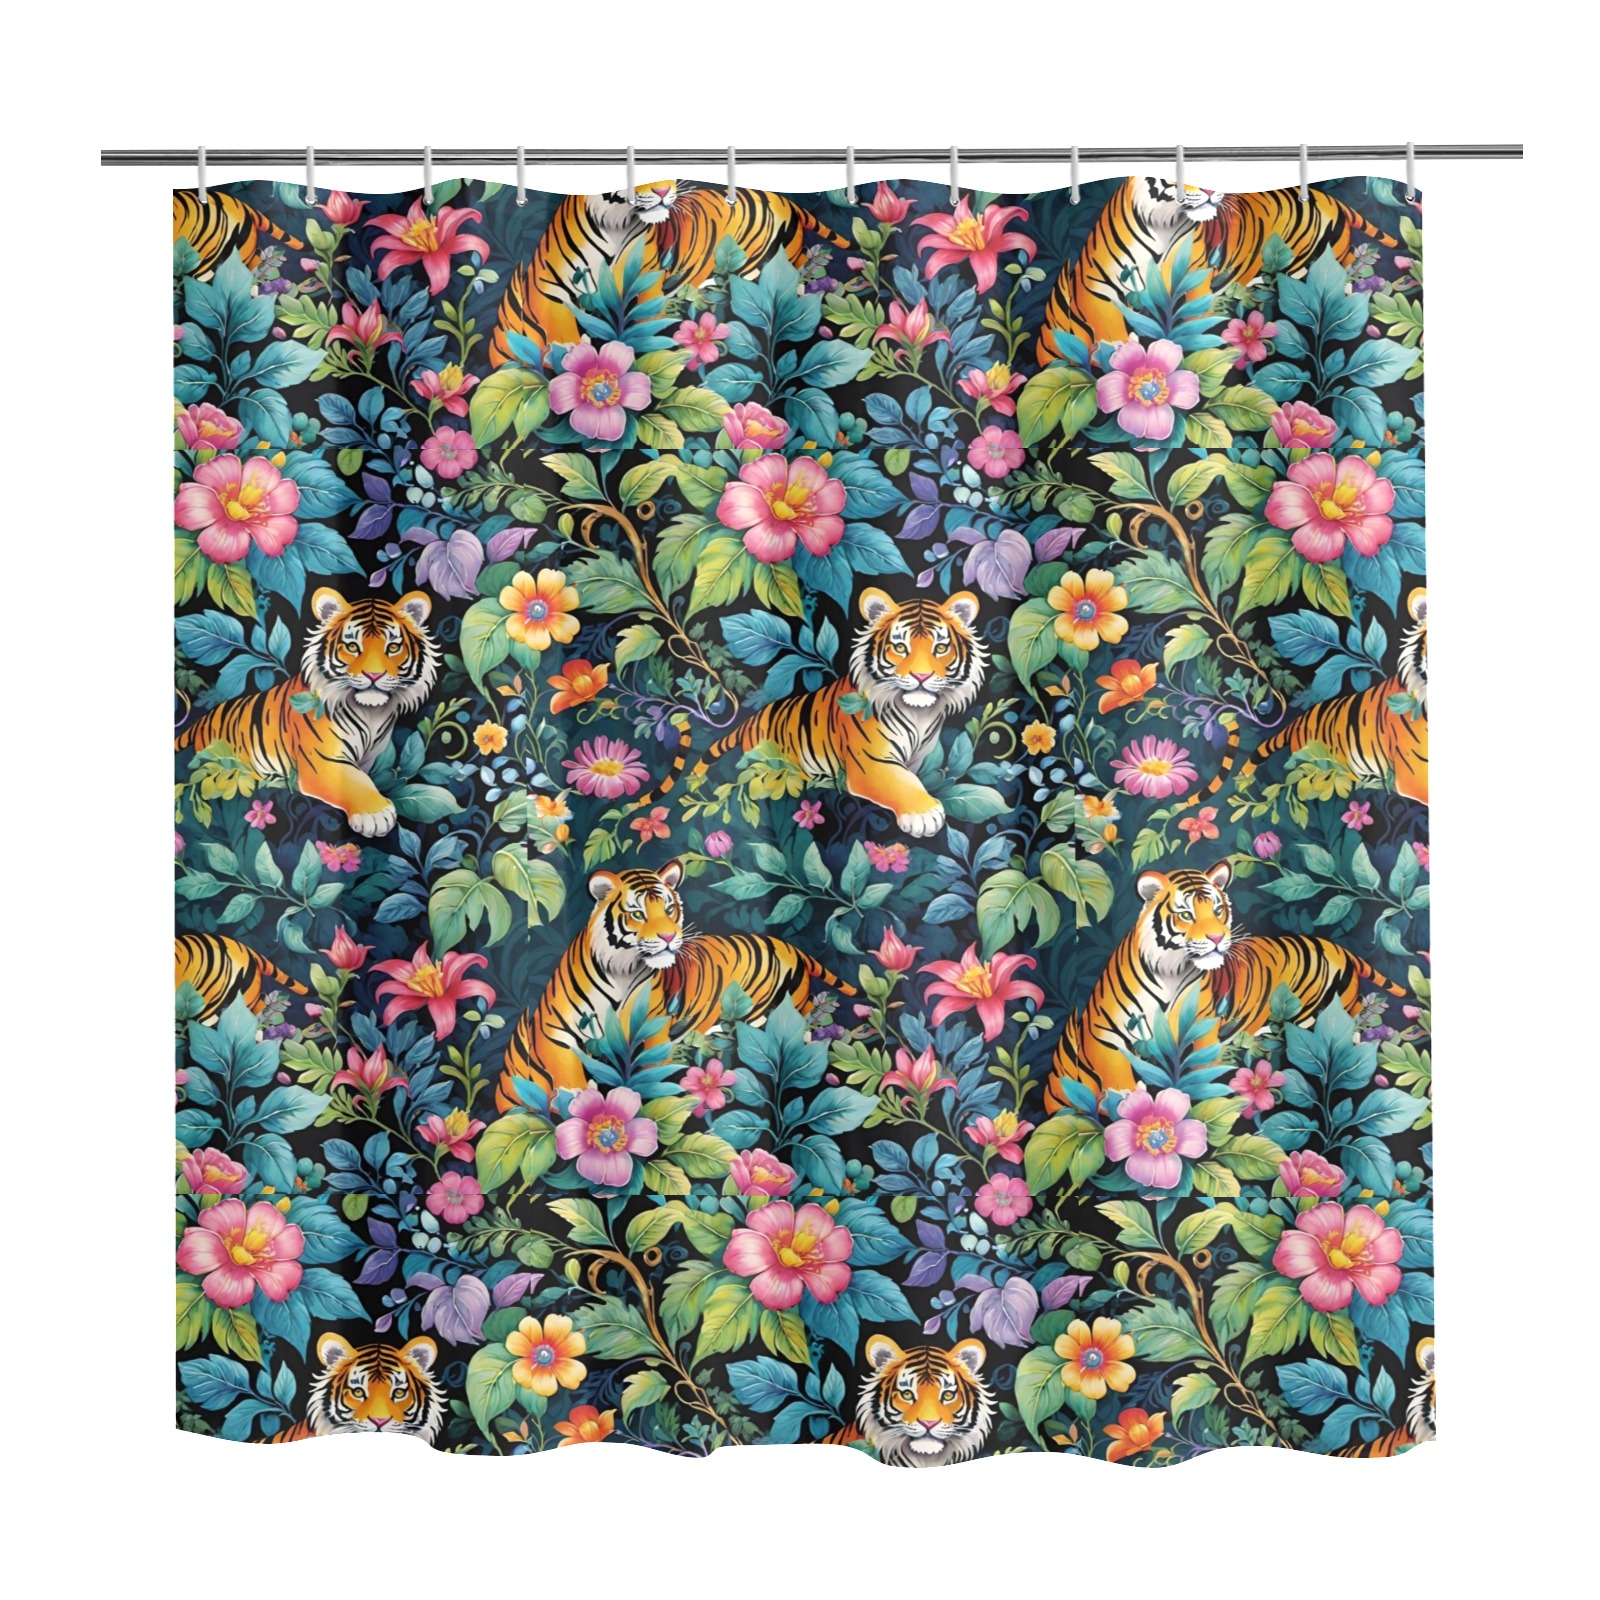 Jungle Tigers and Tropical Flowers Pattern Shower Curtain 72" x 72"